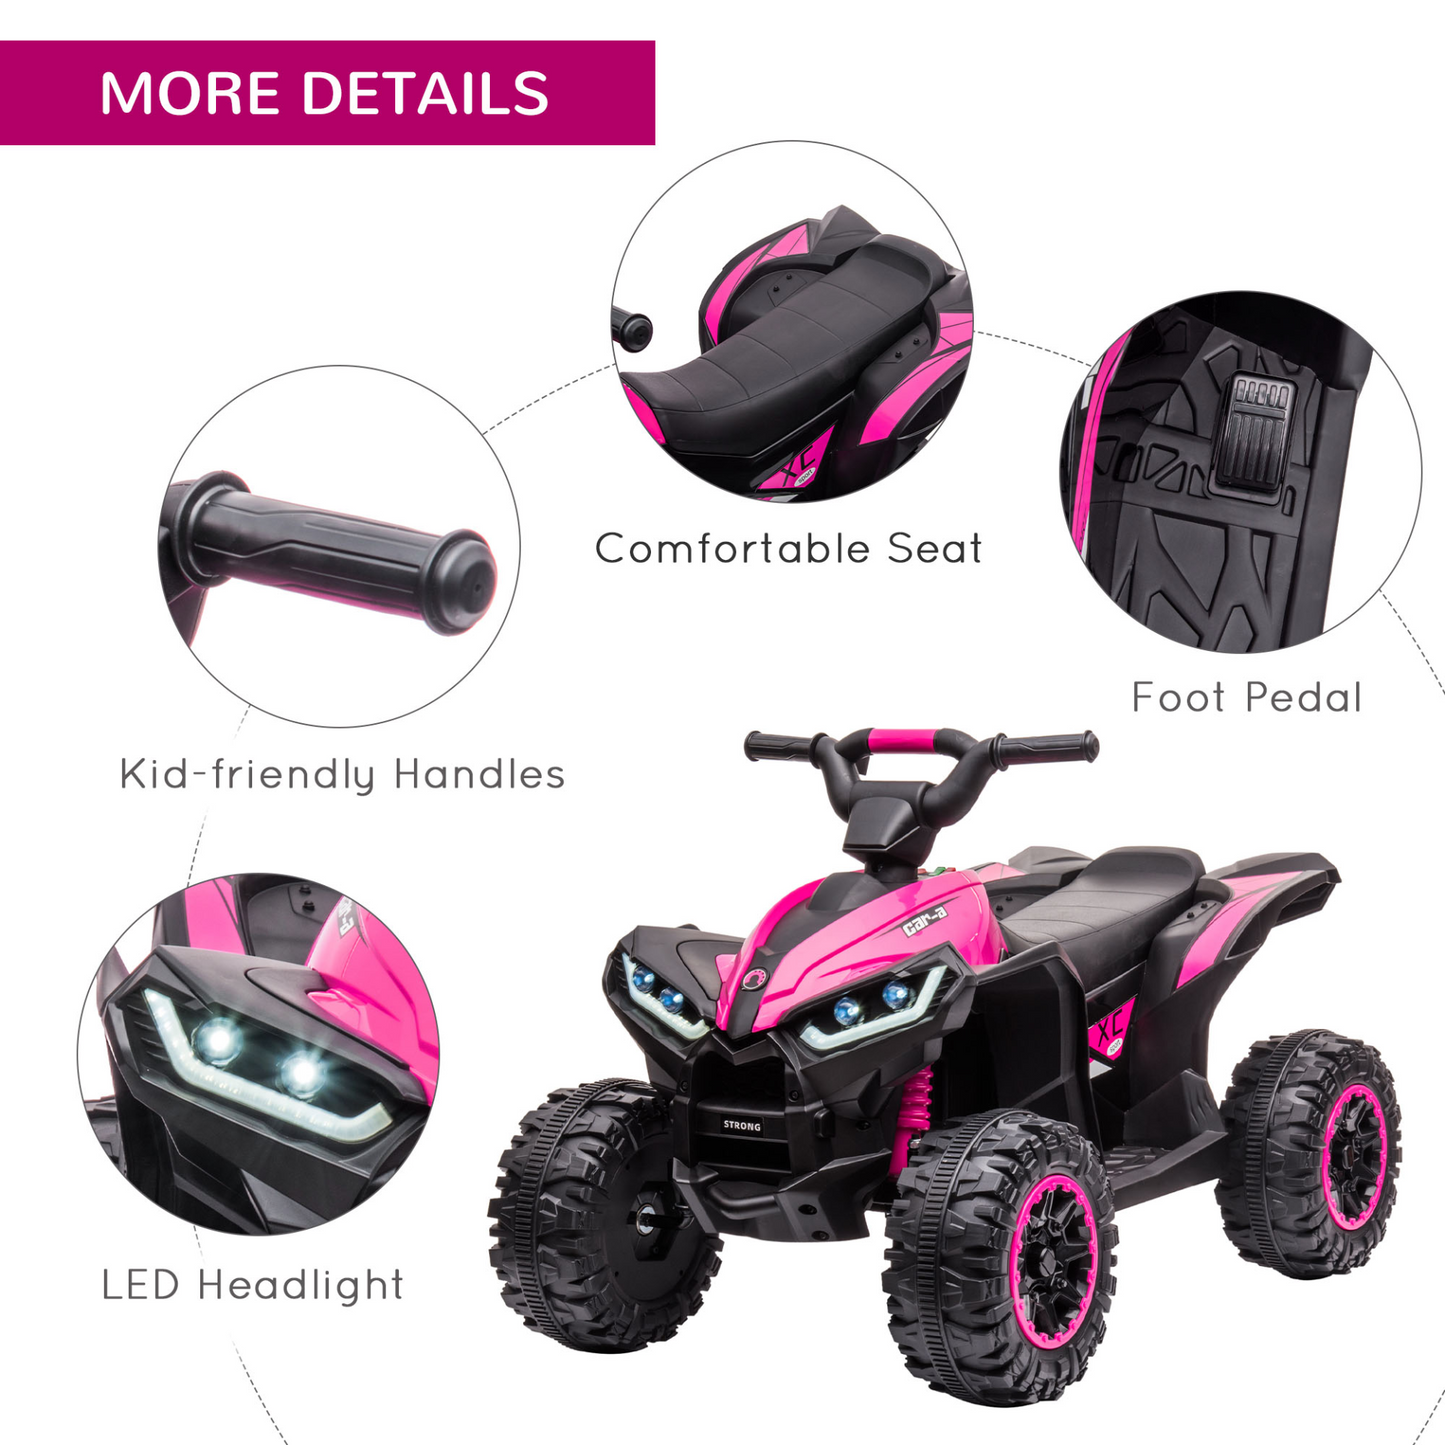 HOMCOM 12V Electric Quad Bikes for Kids Ride On Car ATV Toy, with Forward Reverse Functions, LED Headlights, for Ages 3-5 Years - Pink